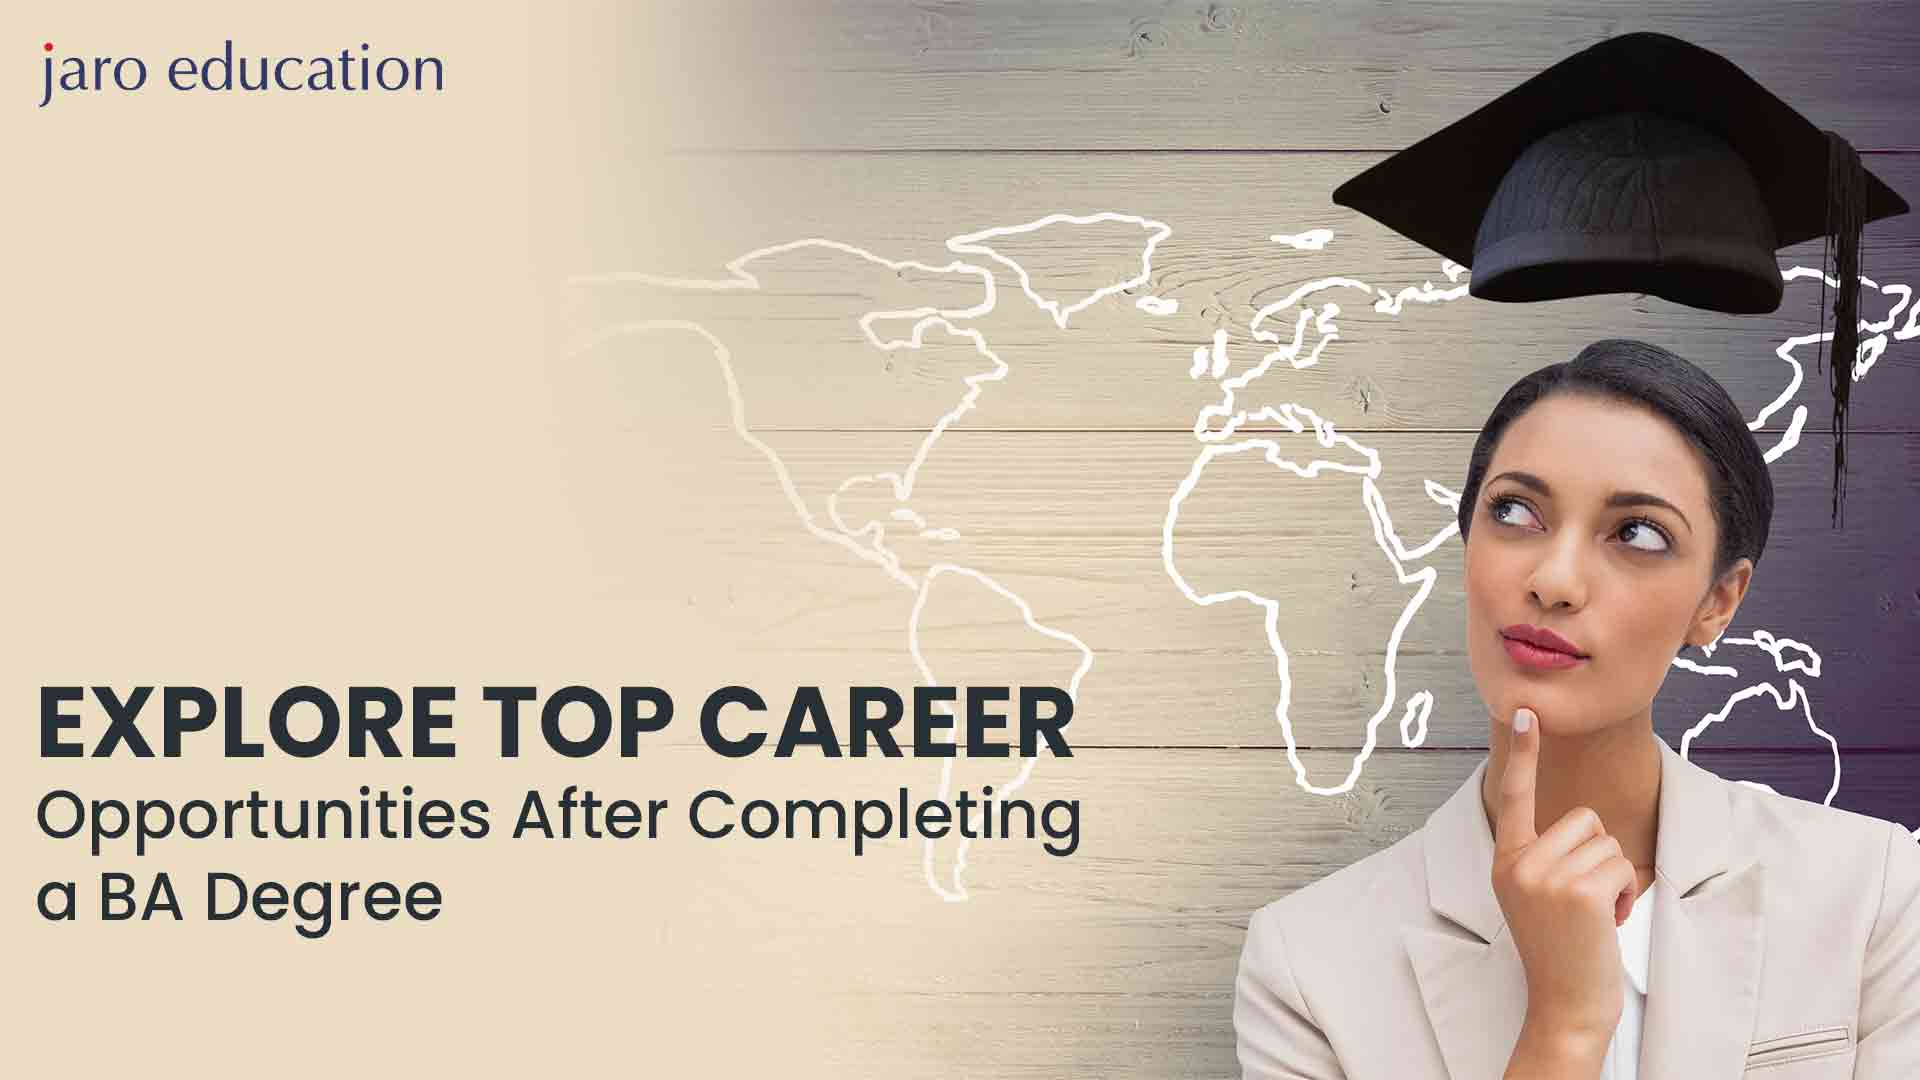 Explore Top Career Opportunities After Completing a BA Degree